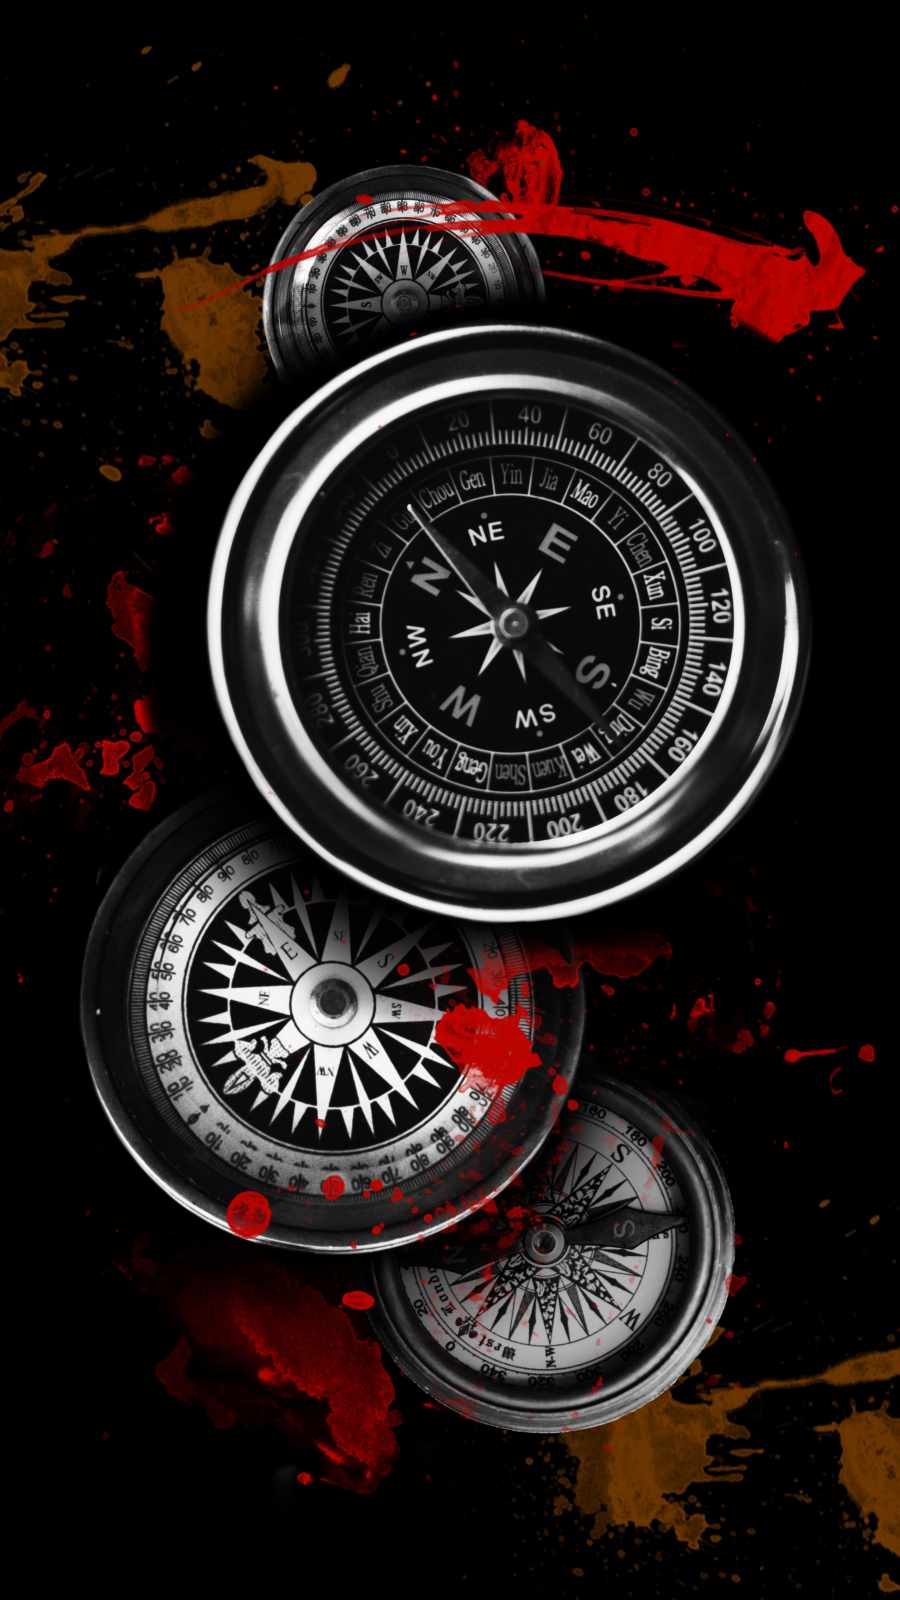 Compass Wallpapers